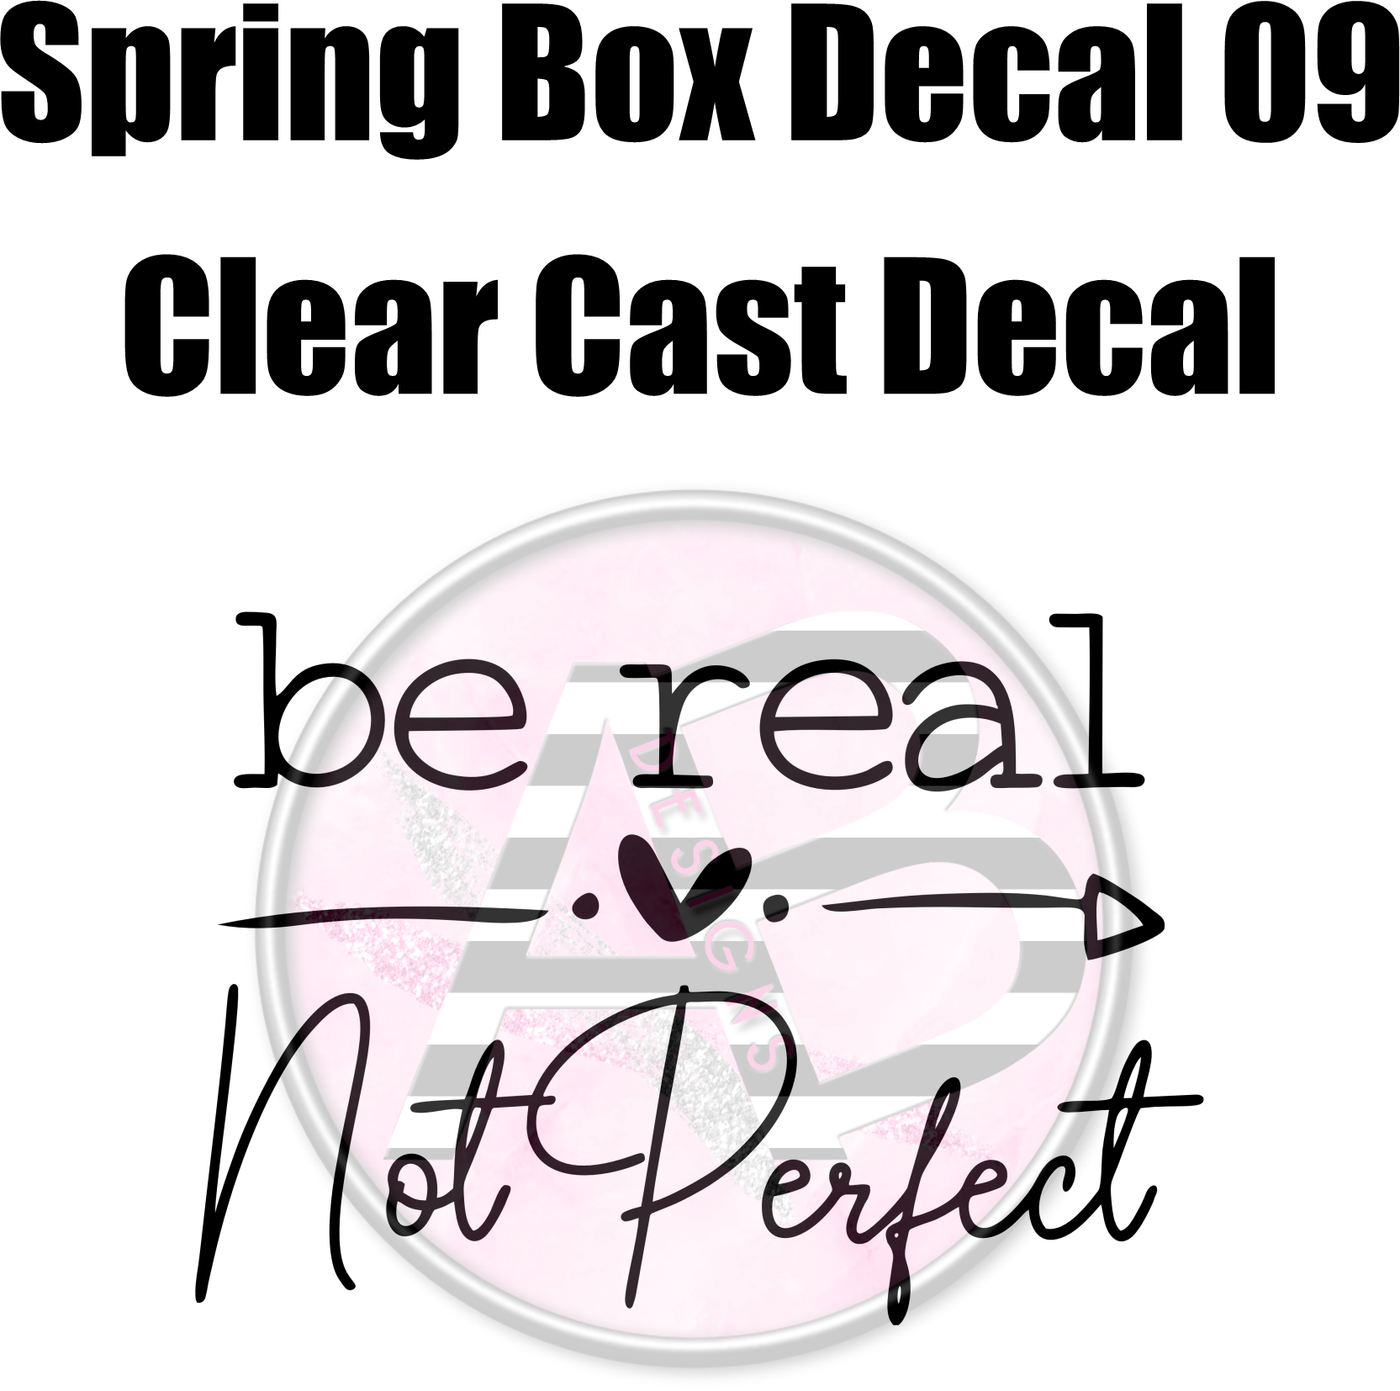 Spring Box Decal 09 - Clear Cast Decal